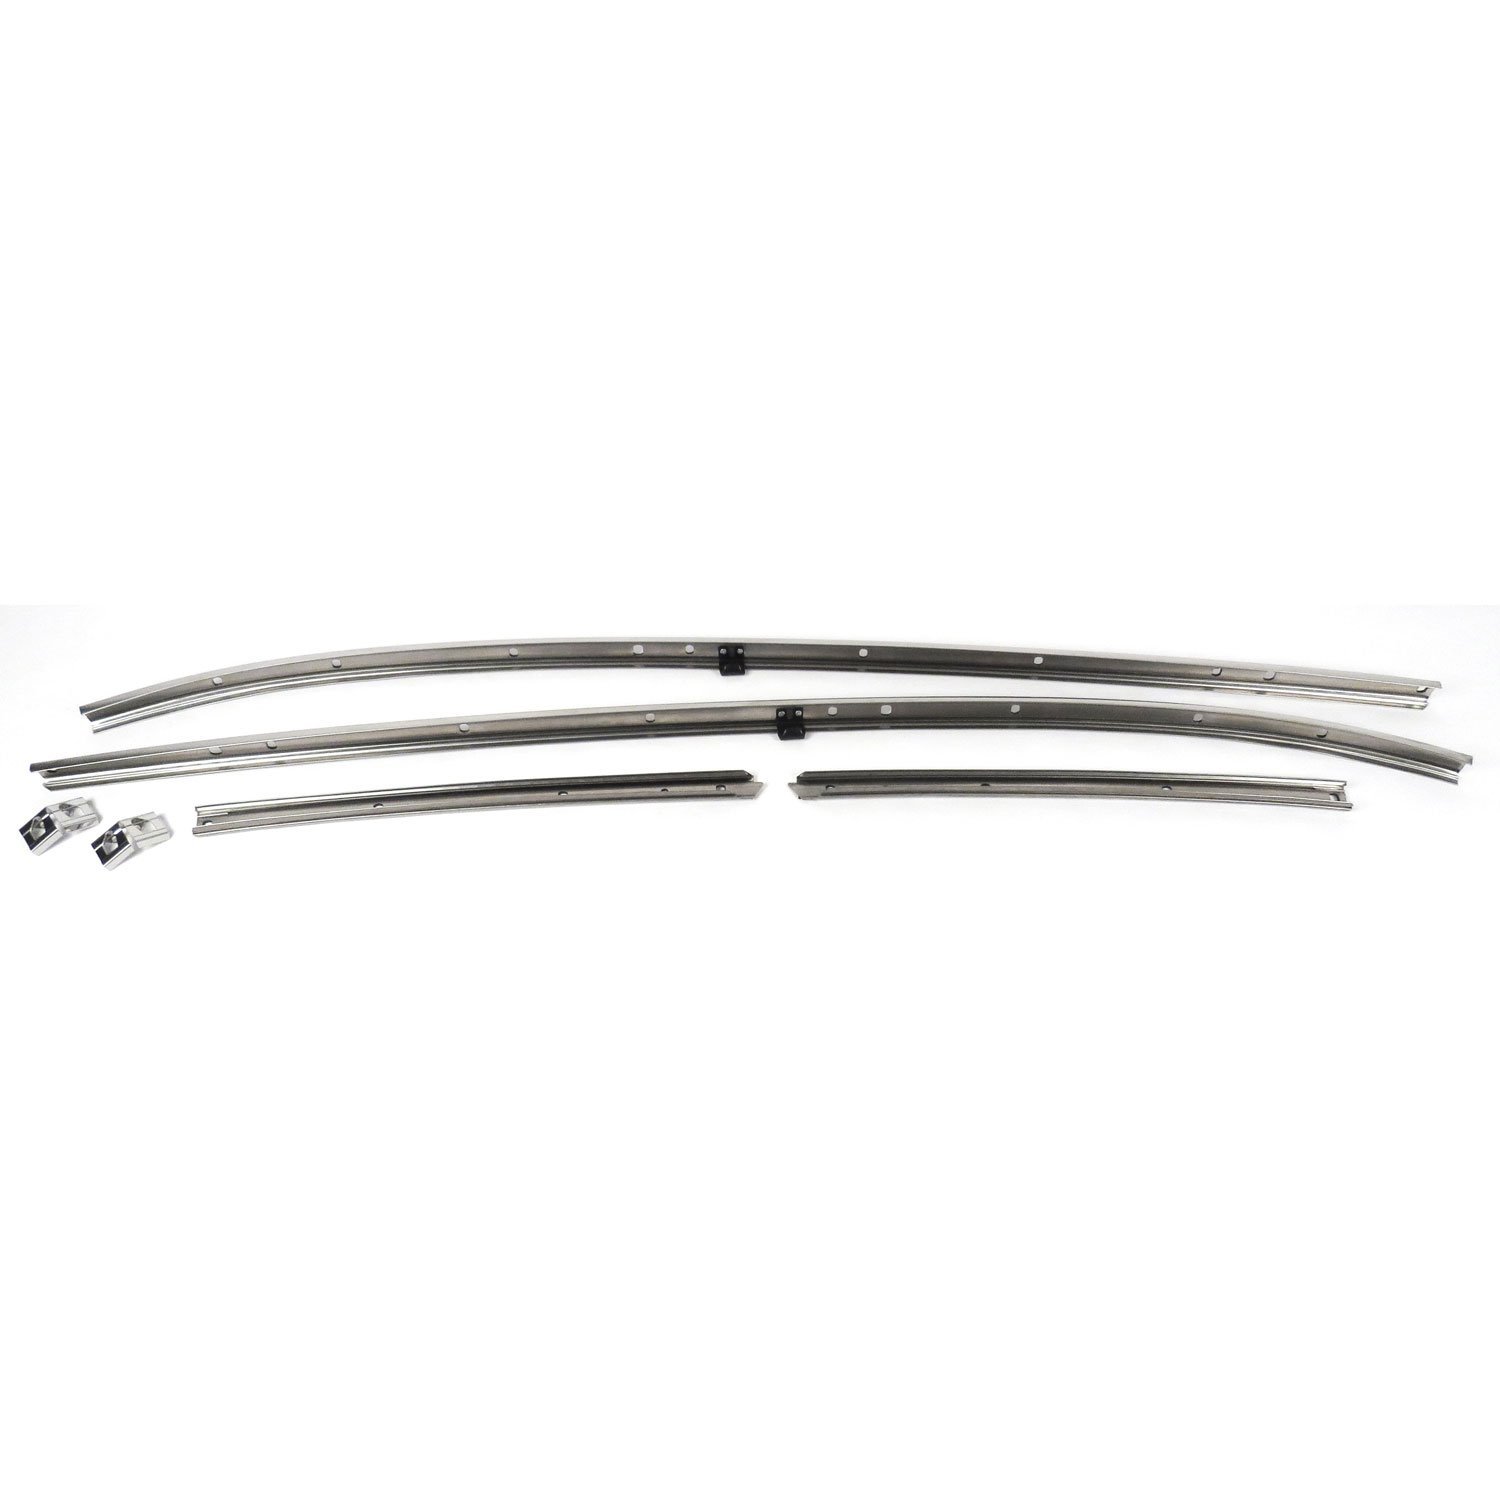 ROOF RAIL WEATHERSTRIP CHANNEL SET 68 CHEVELLE